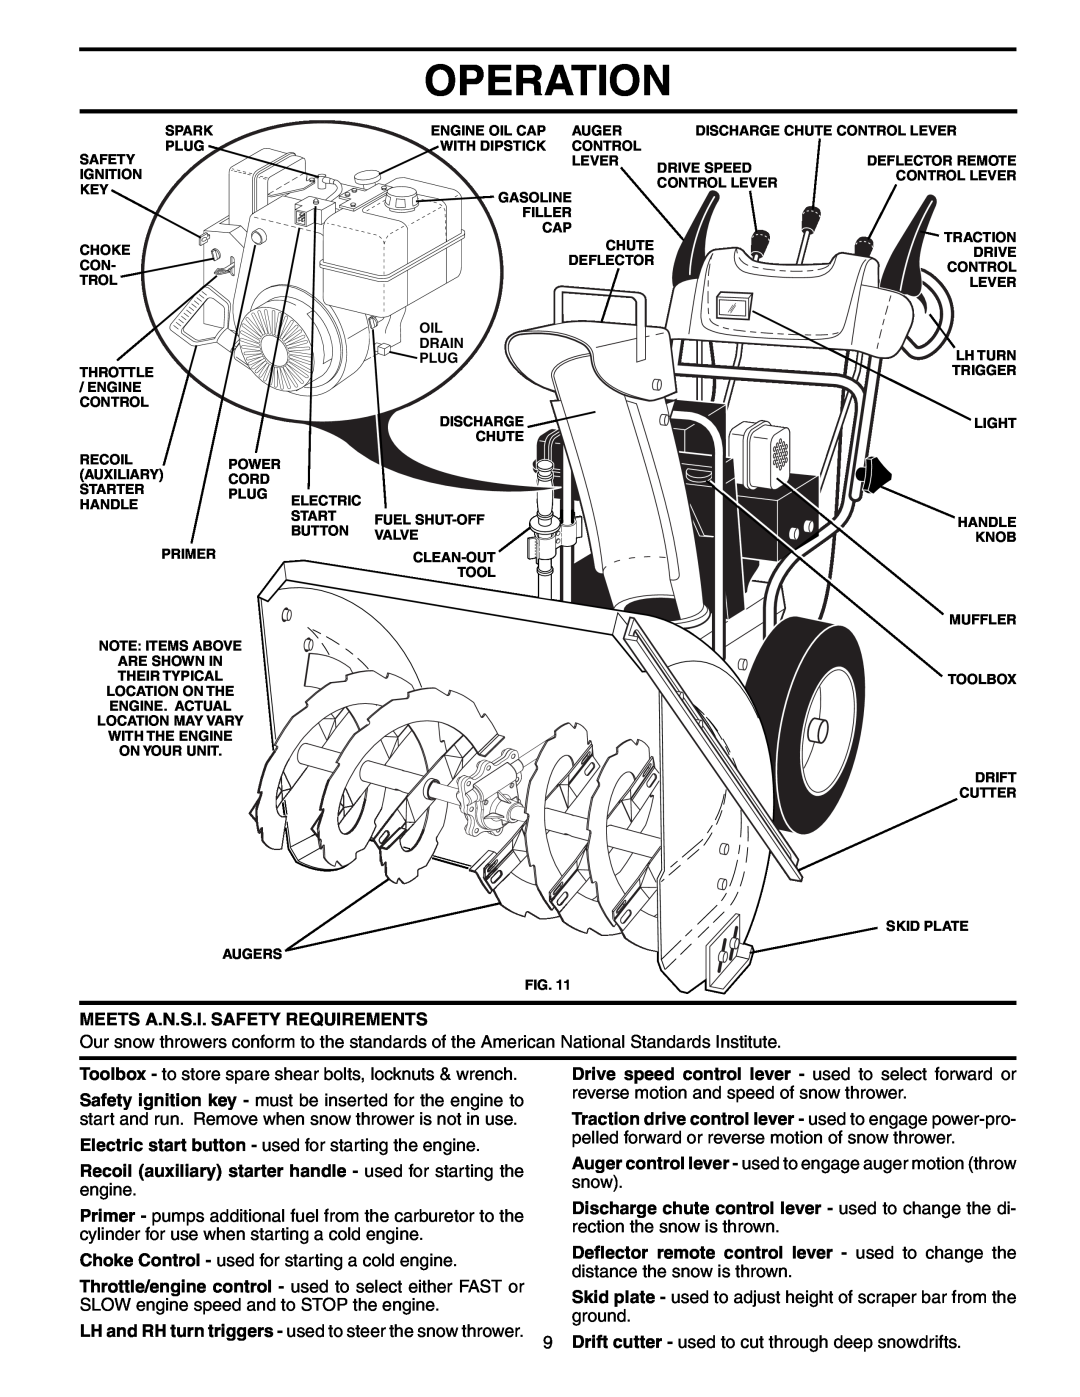 Poulan 192046 owner manual Operation, Meets A.N.S.I. Safety Requirements 